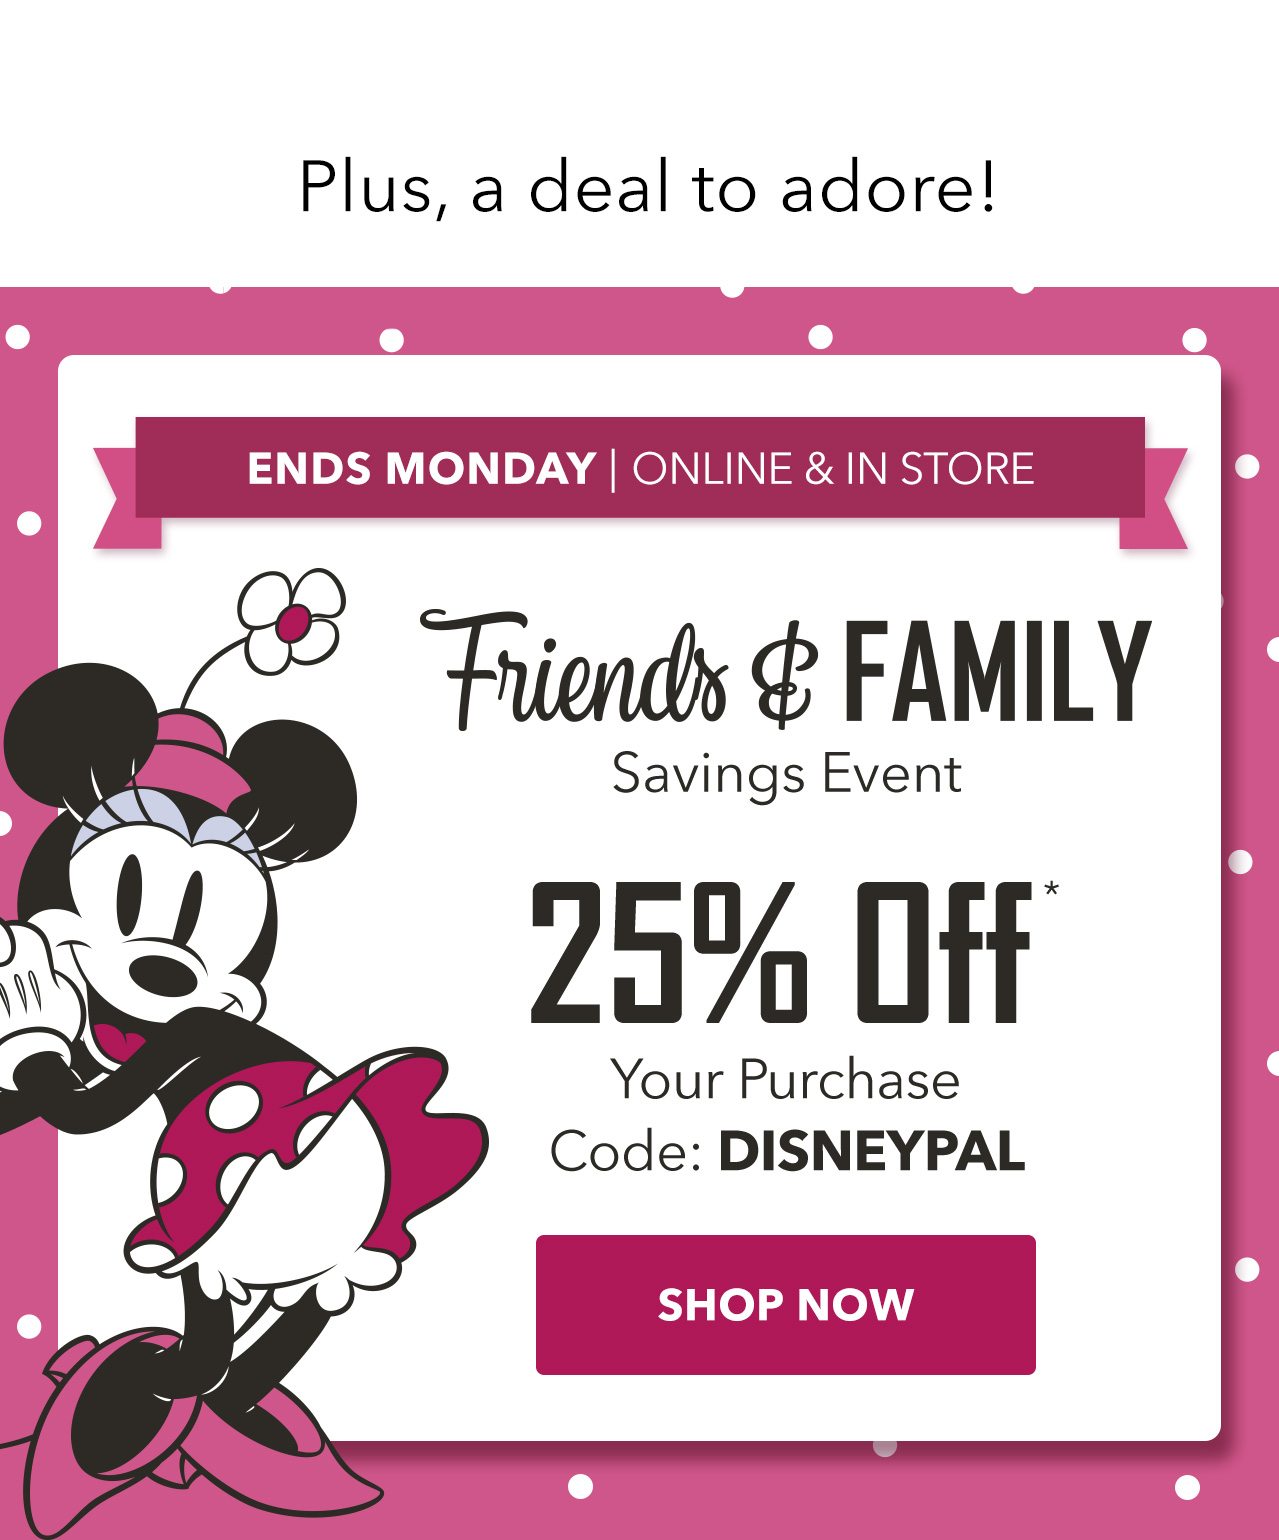 Plus, a deal to adore! ENDS MONDAY | ONLINE & IN STORE. Friends & Family Savings Event 25% Off Your Purchase Code: DISNEYPAL | Shop Now